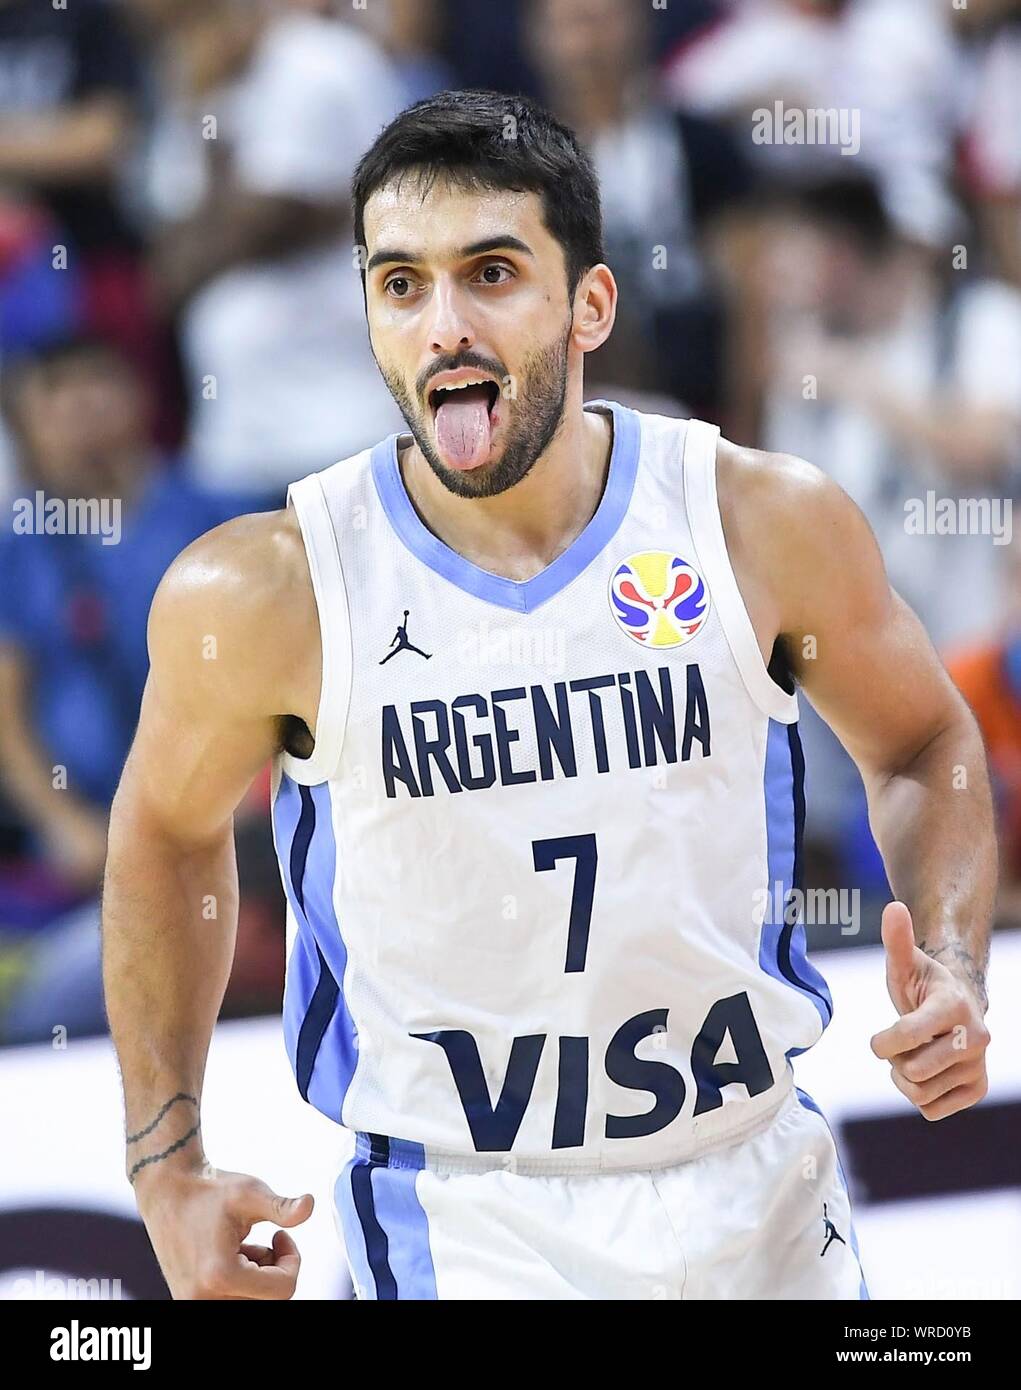 Facundo Campazzo High Resolution Stock Photography and Images - Alamy